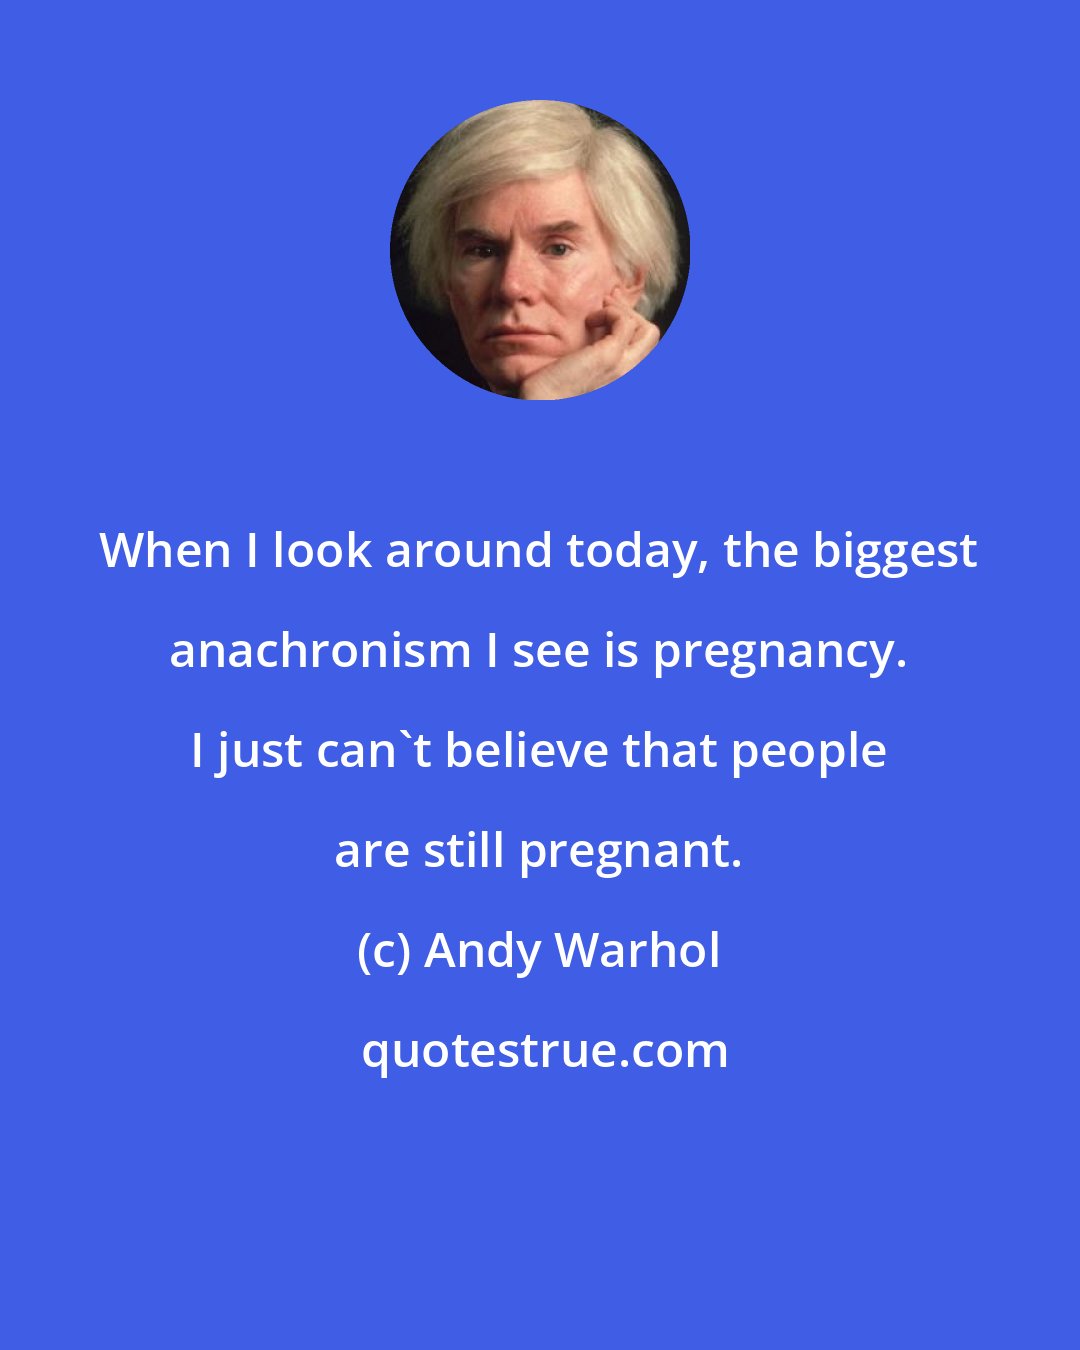 Andy Warhol: When I look around today, the biggest anachronism I see is pregnancy. I just can't believe that people are still pregnant.